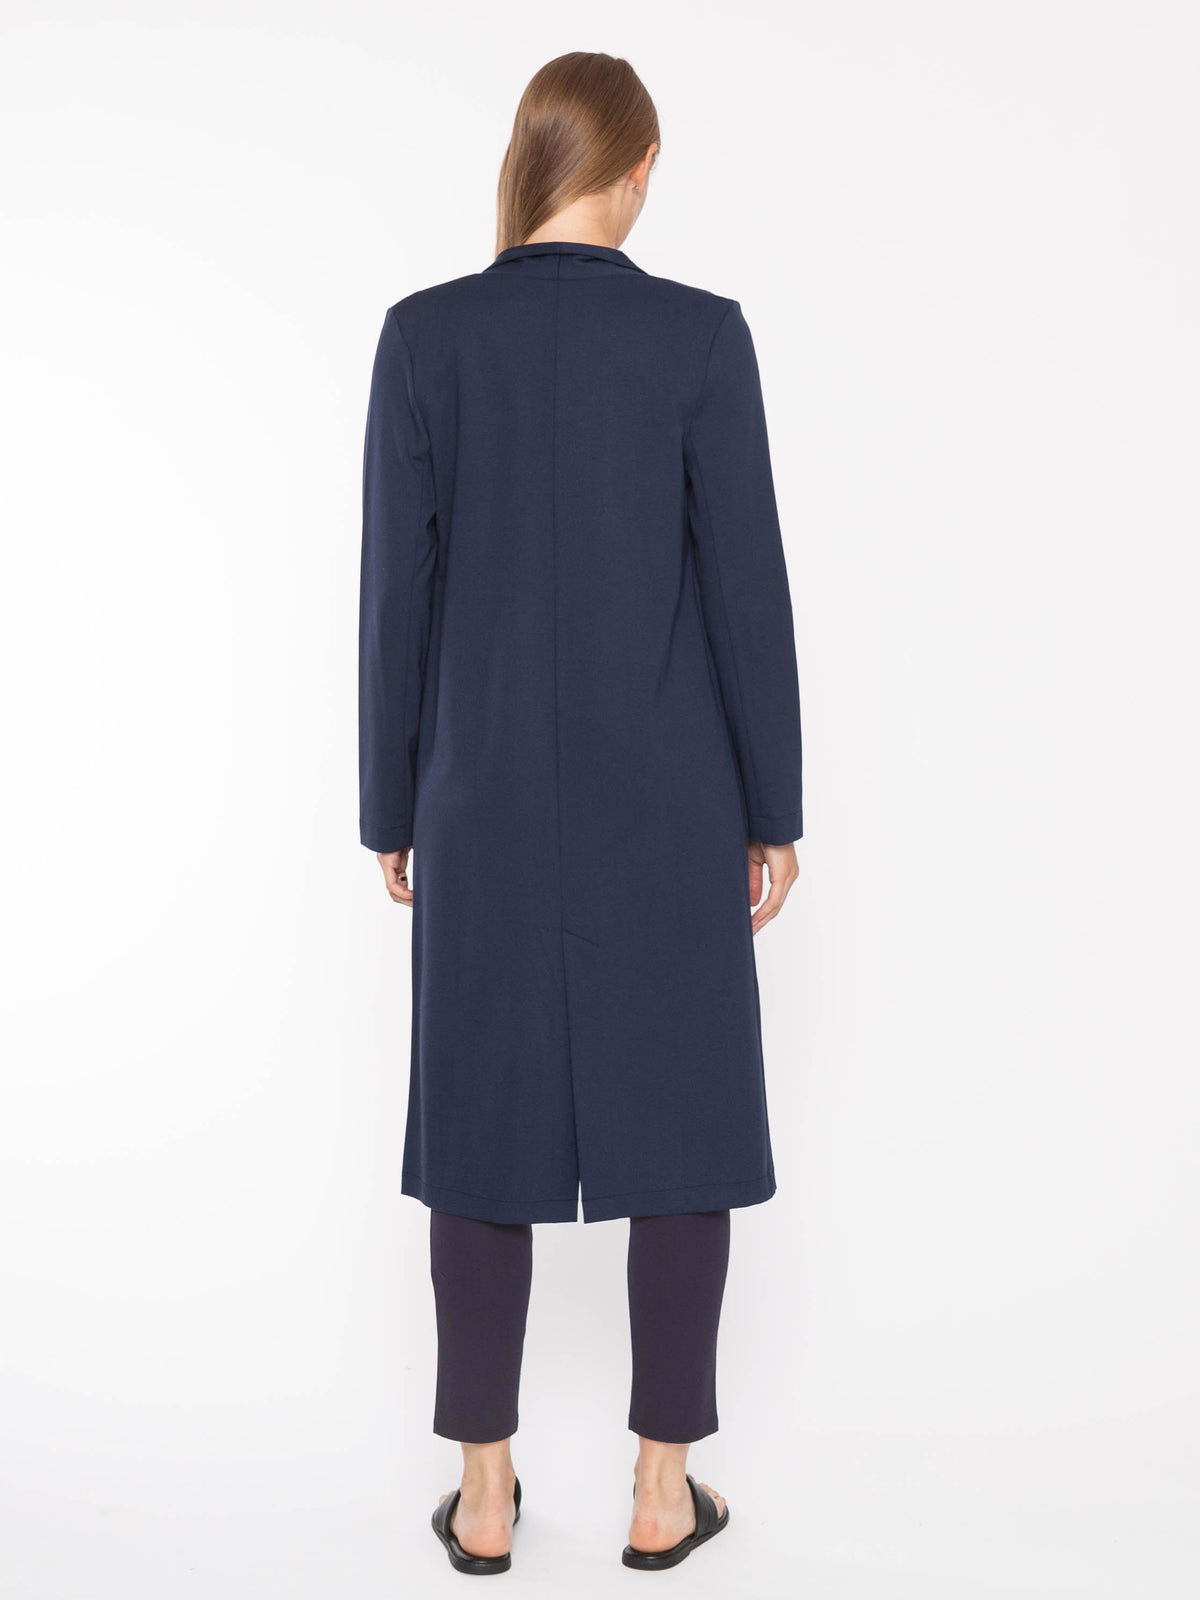 Ponte Knit Duster Jacket in Navy